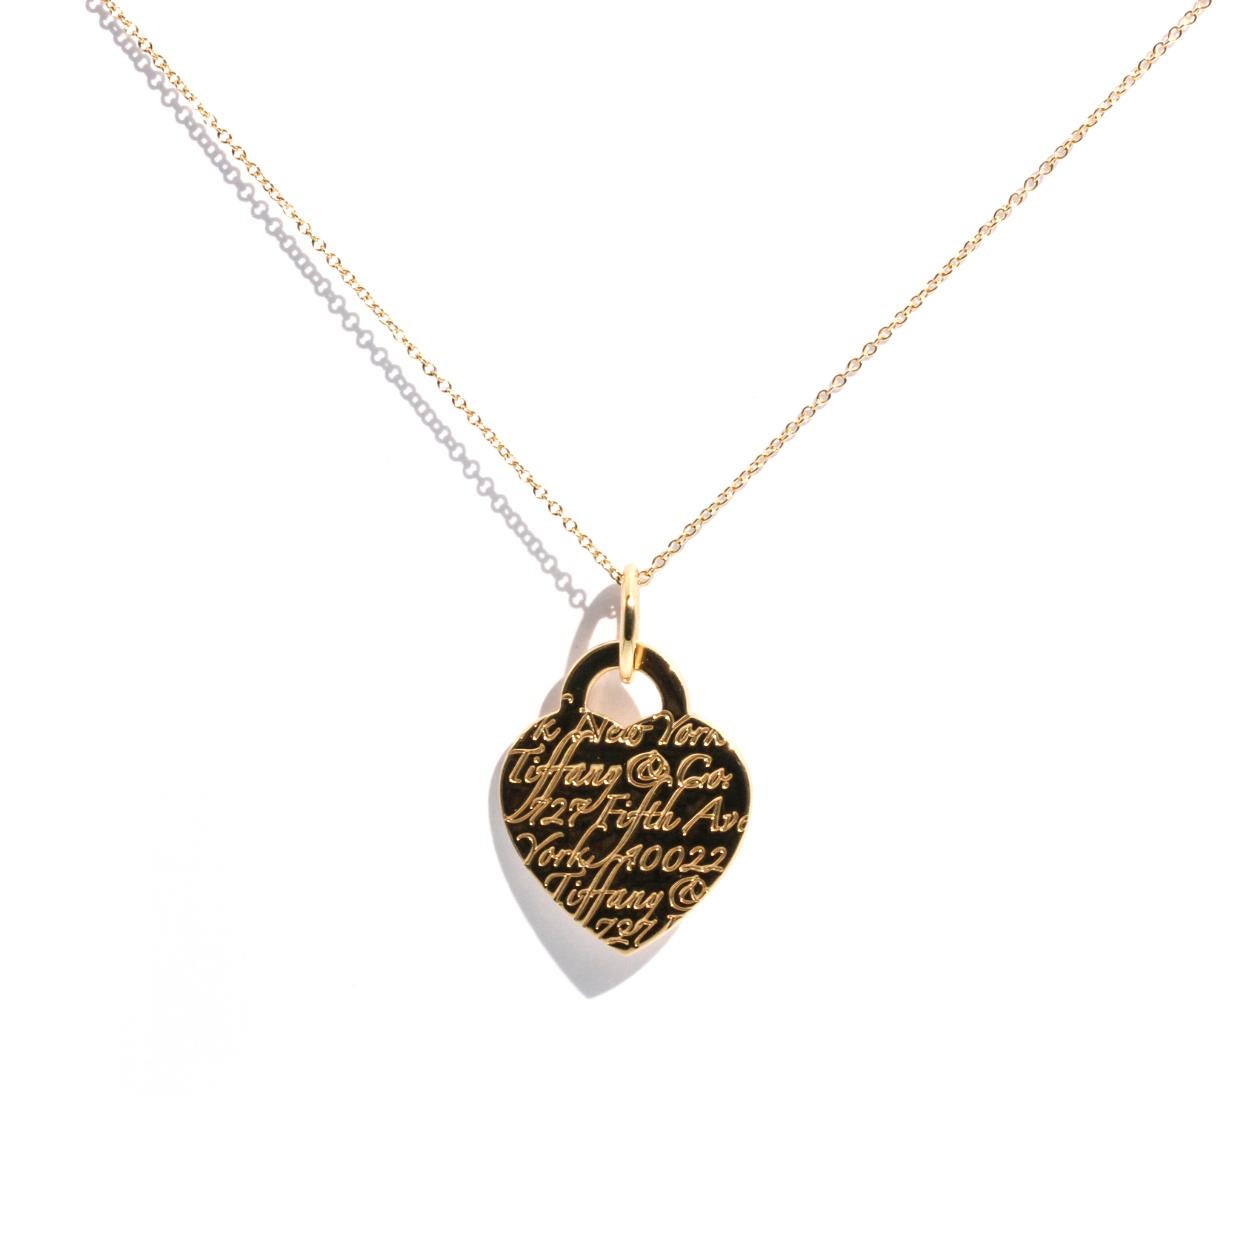 18 carat yellow gold Tiffany and Co Notes Heart Pendant and Tiffany and Co Chain is threaded on a Tiffany and Co 18 carat yellow gold chain. Tiffany and Co Notes Heart Pendant has the Tiffany and Co signature script on the front. The Tiffany and Co